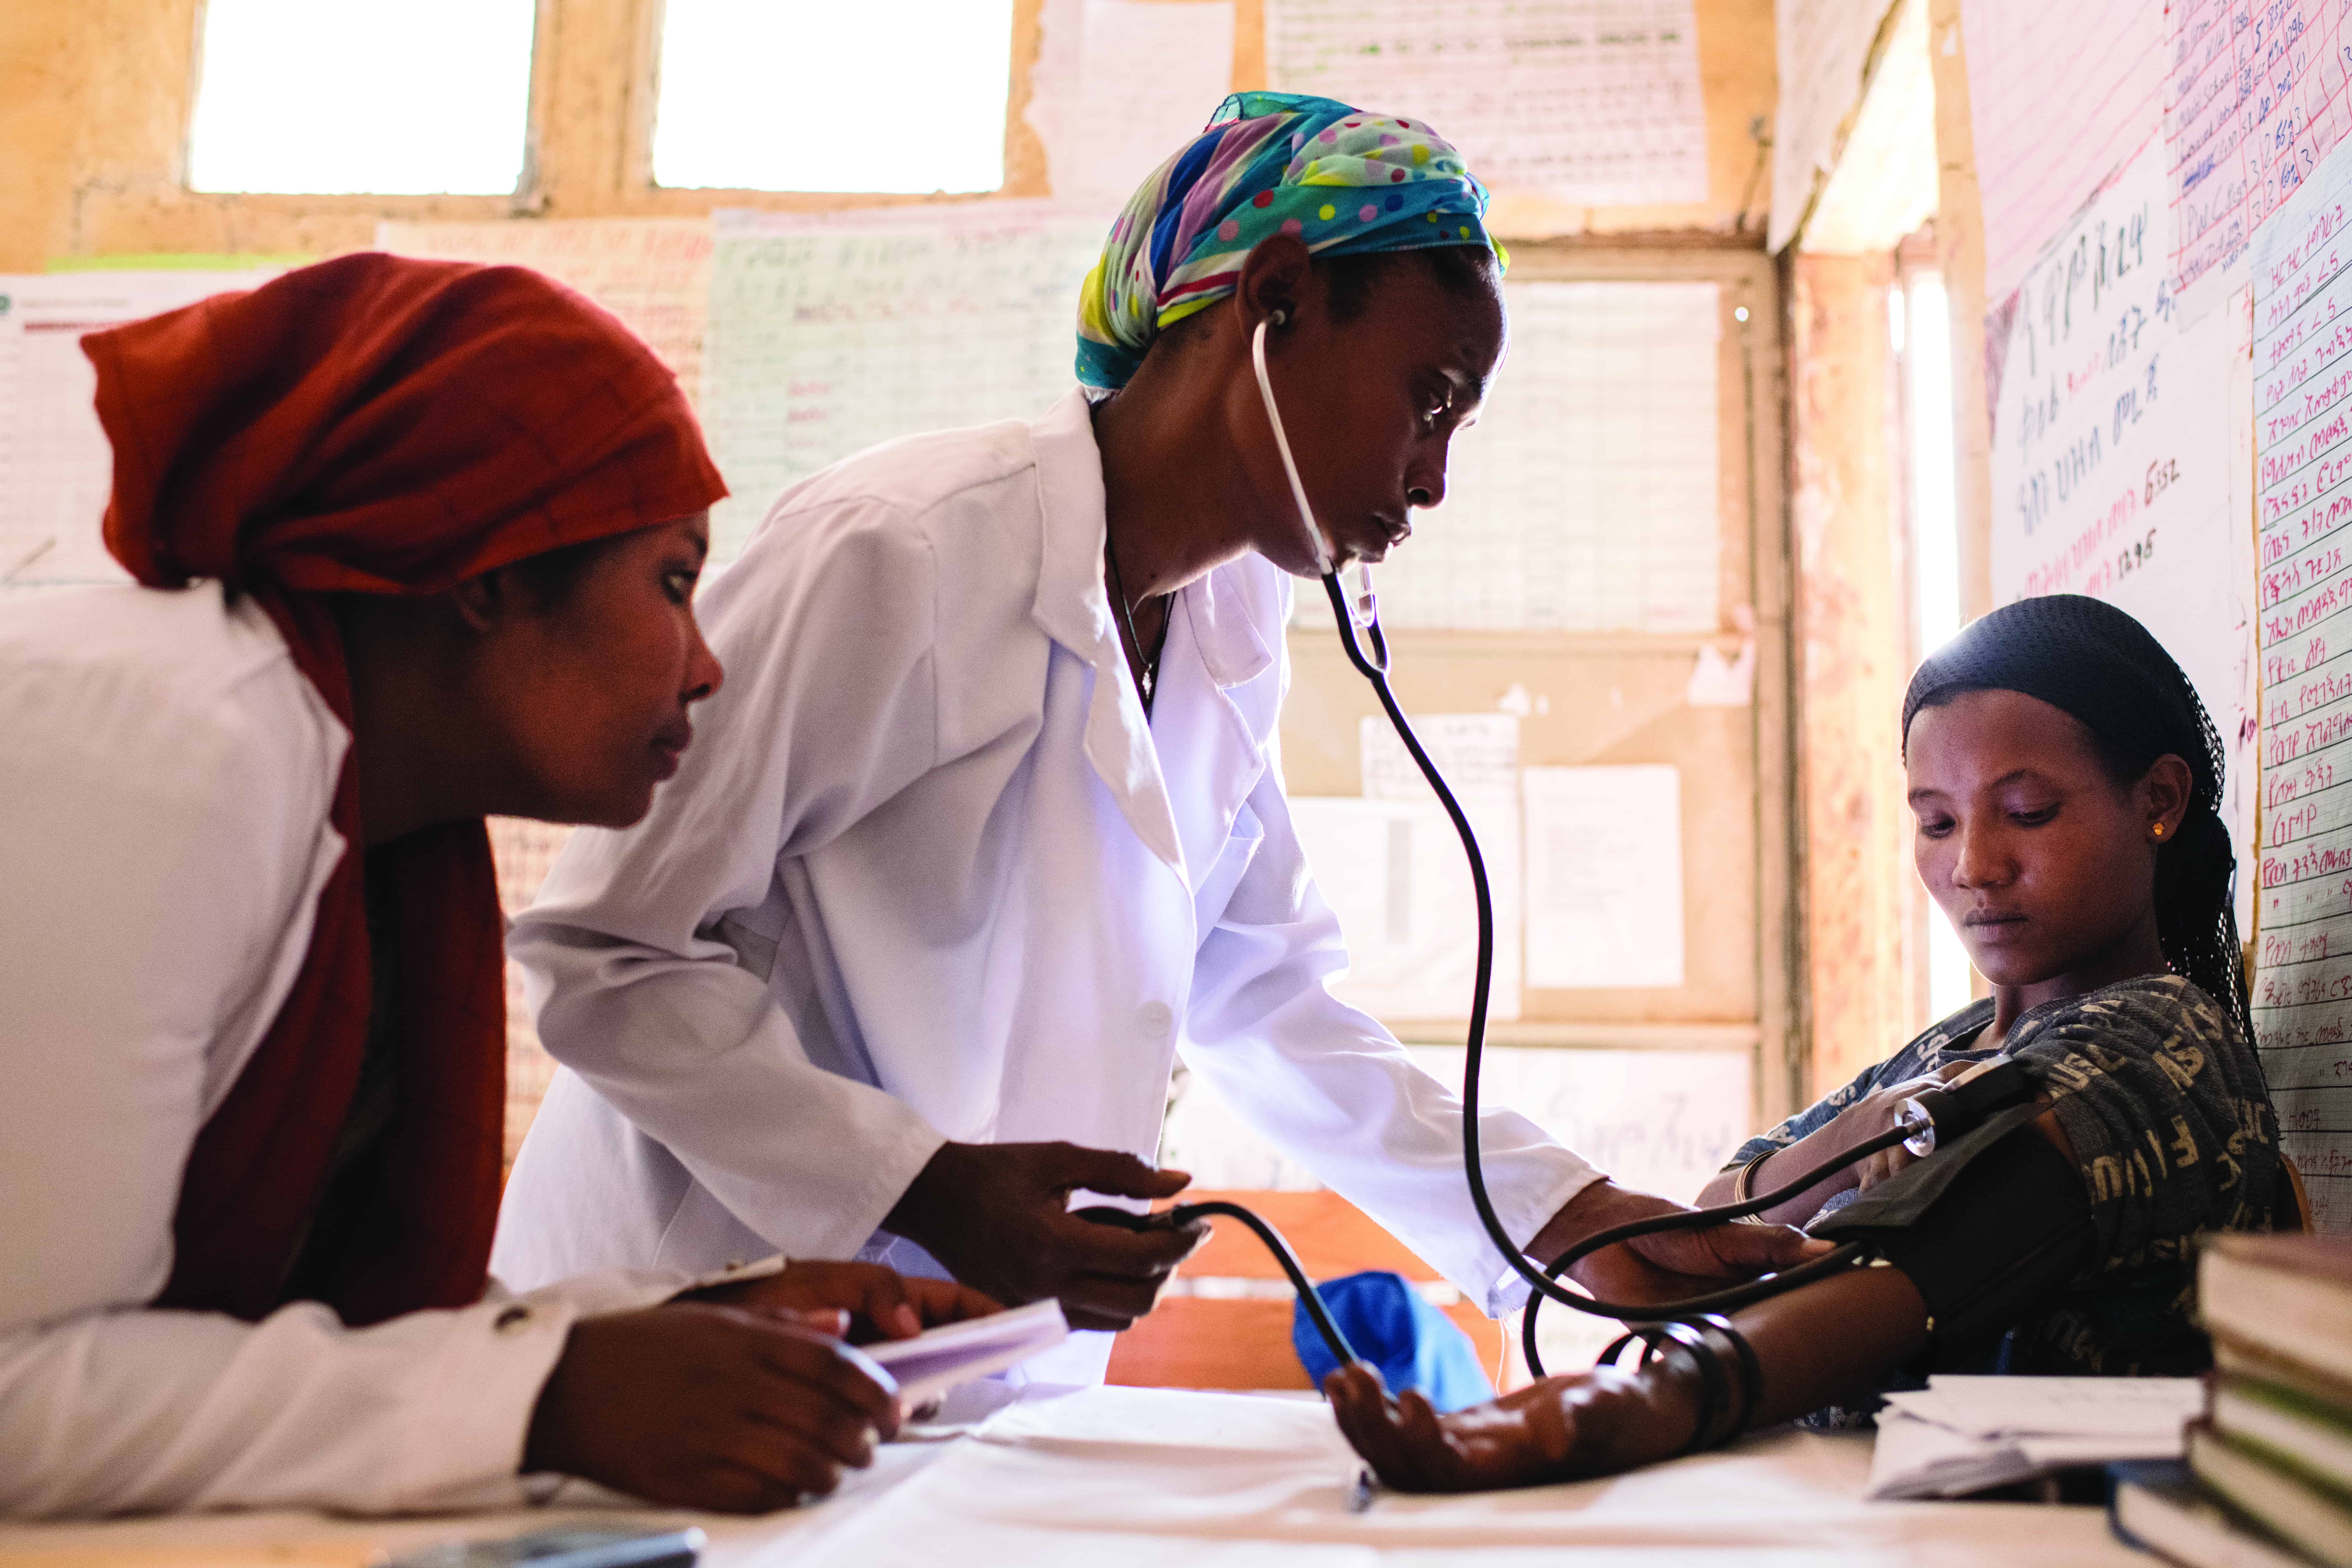 New Video: JSI Helps Expand Access to Health Services for 17 Million Ethiopians